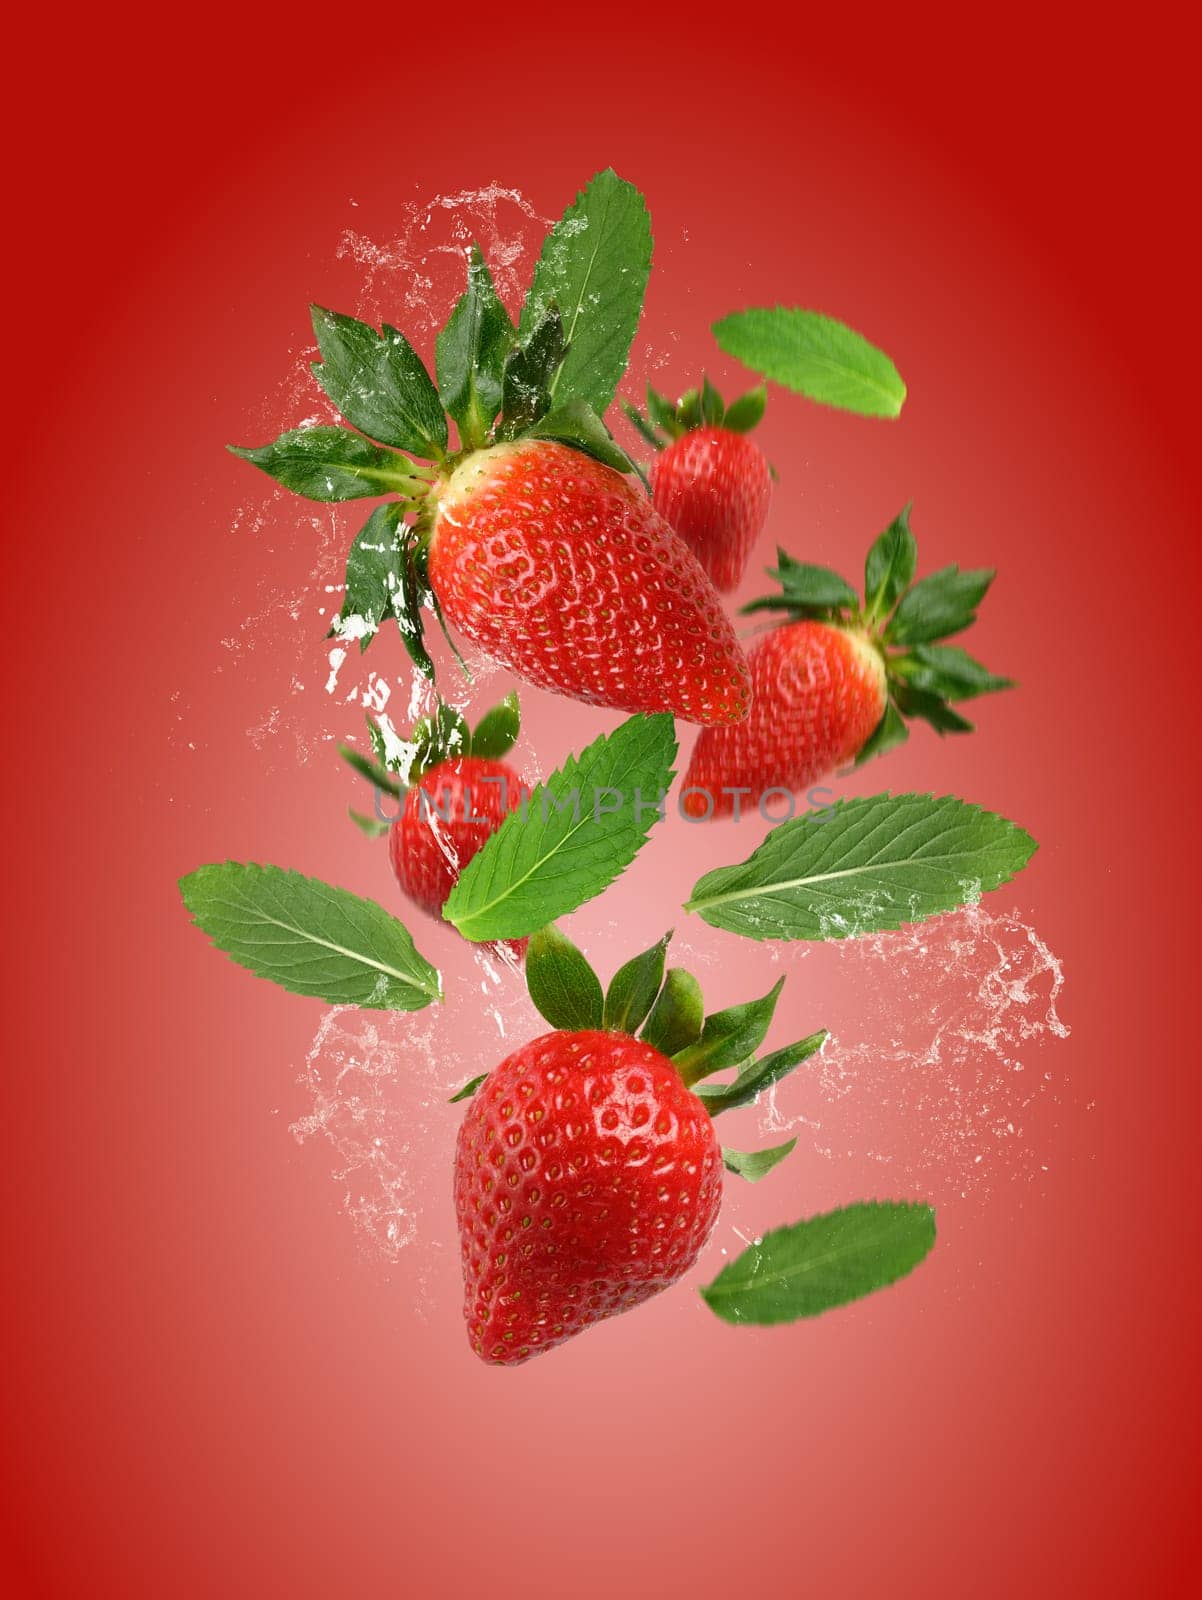 Red ripe strawberry on ia red background. Berries and mint leaves levitate by ndanko